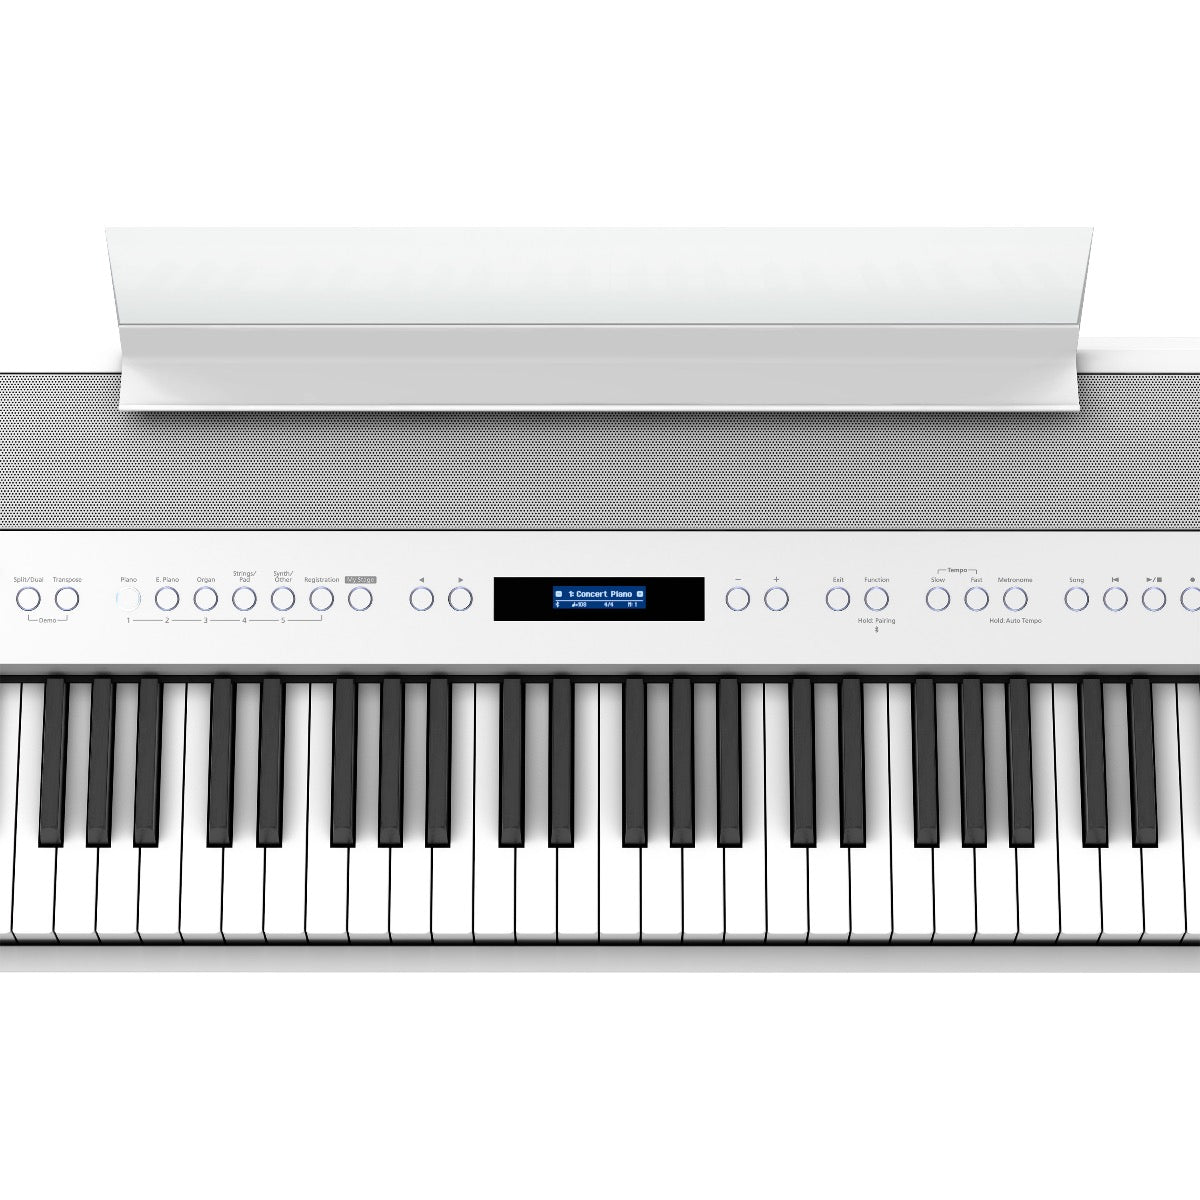 Close-up top view of Roland FP-90X Digital Piano - White showing control panel and portion of keyboard